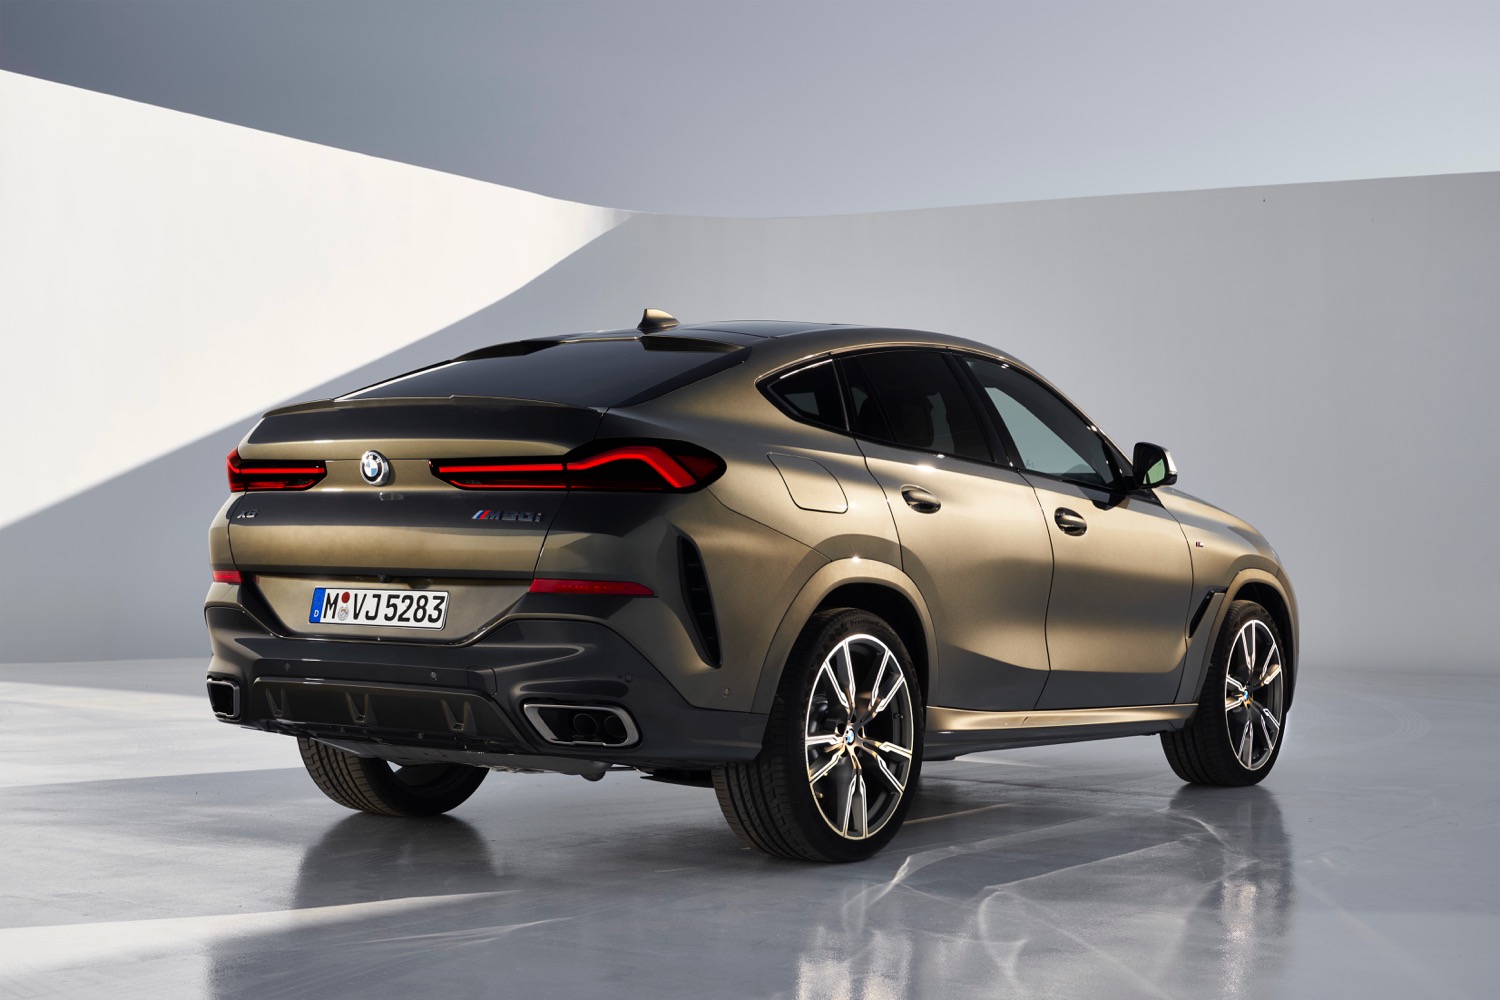 2020 bmw x6 suv coupe